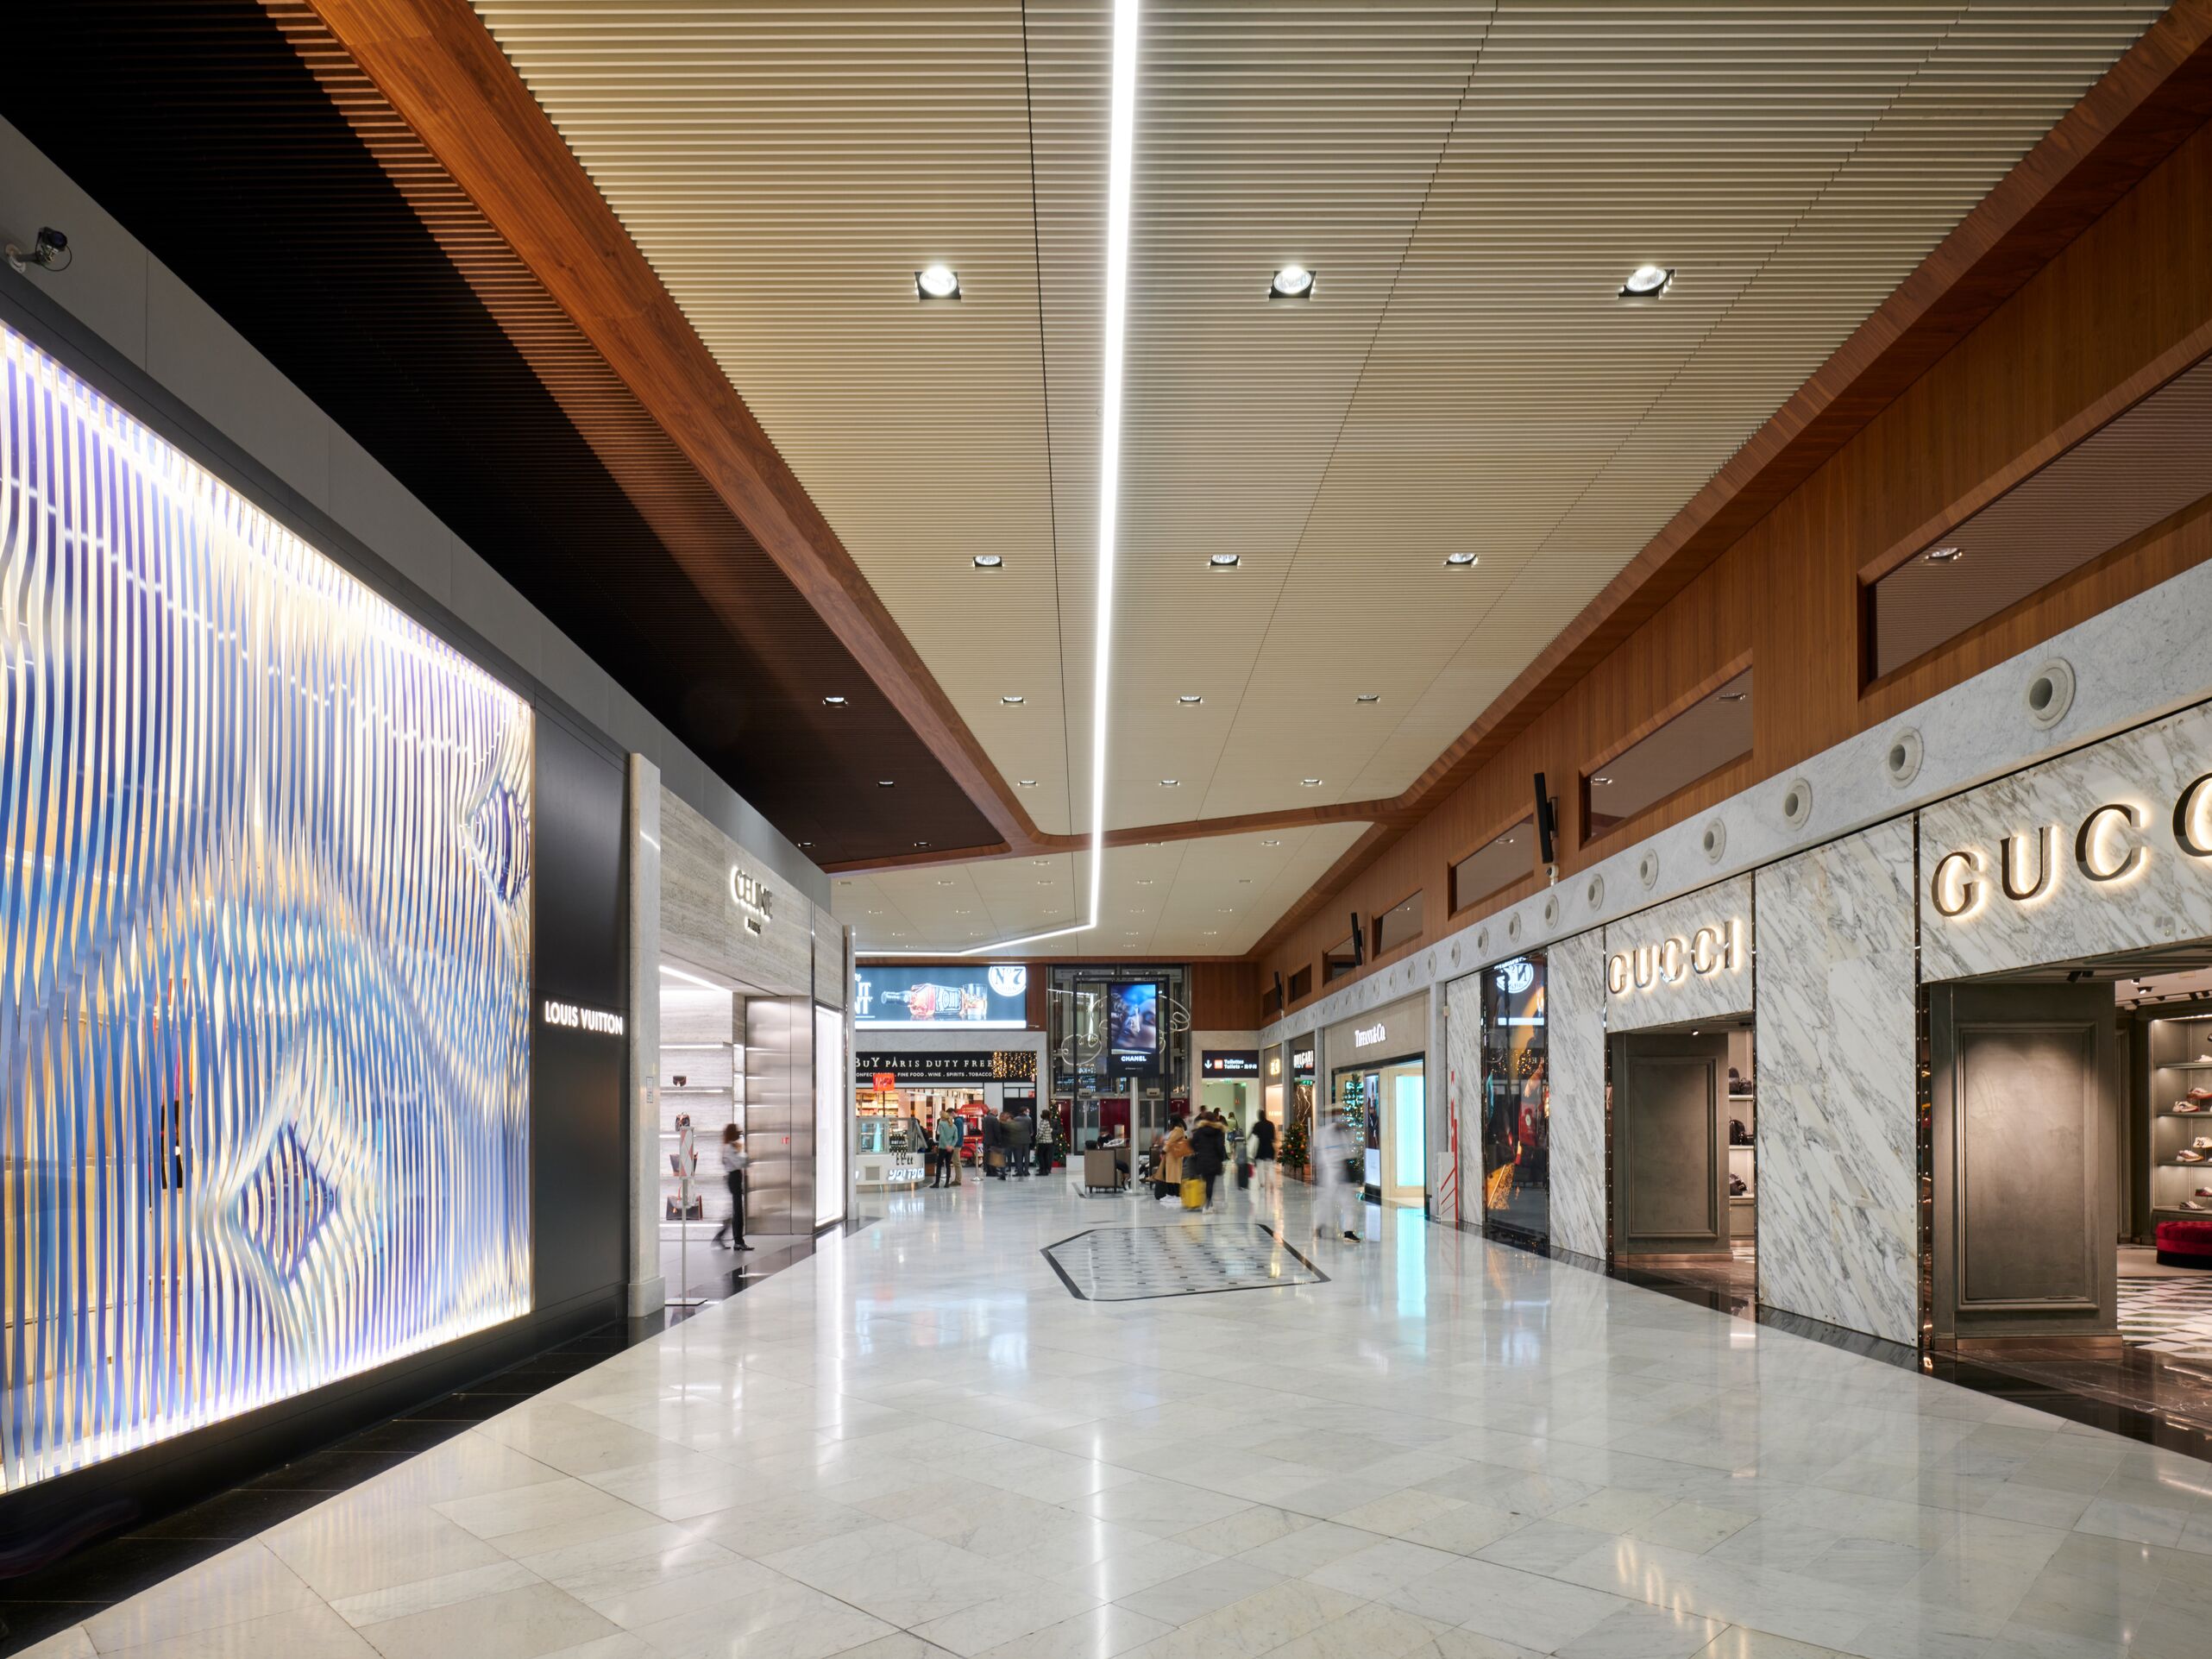 Charles de Gaulle airport shopping center by W, Paris store design